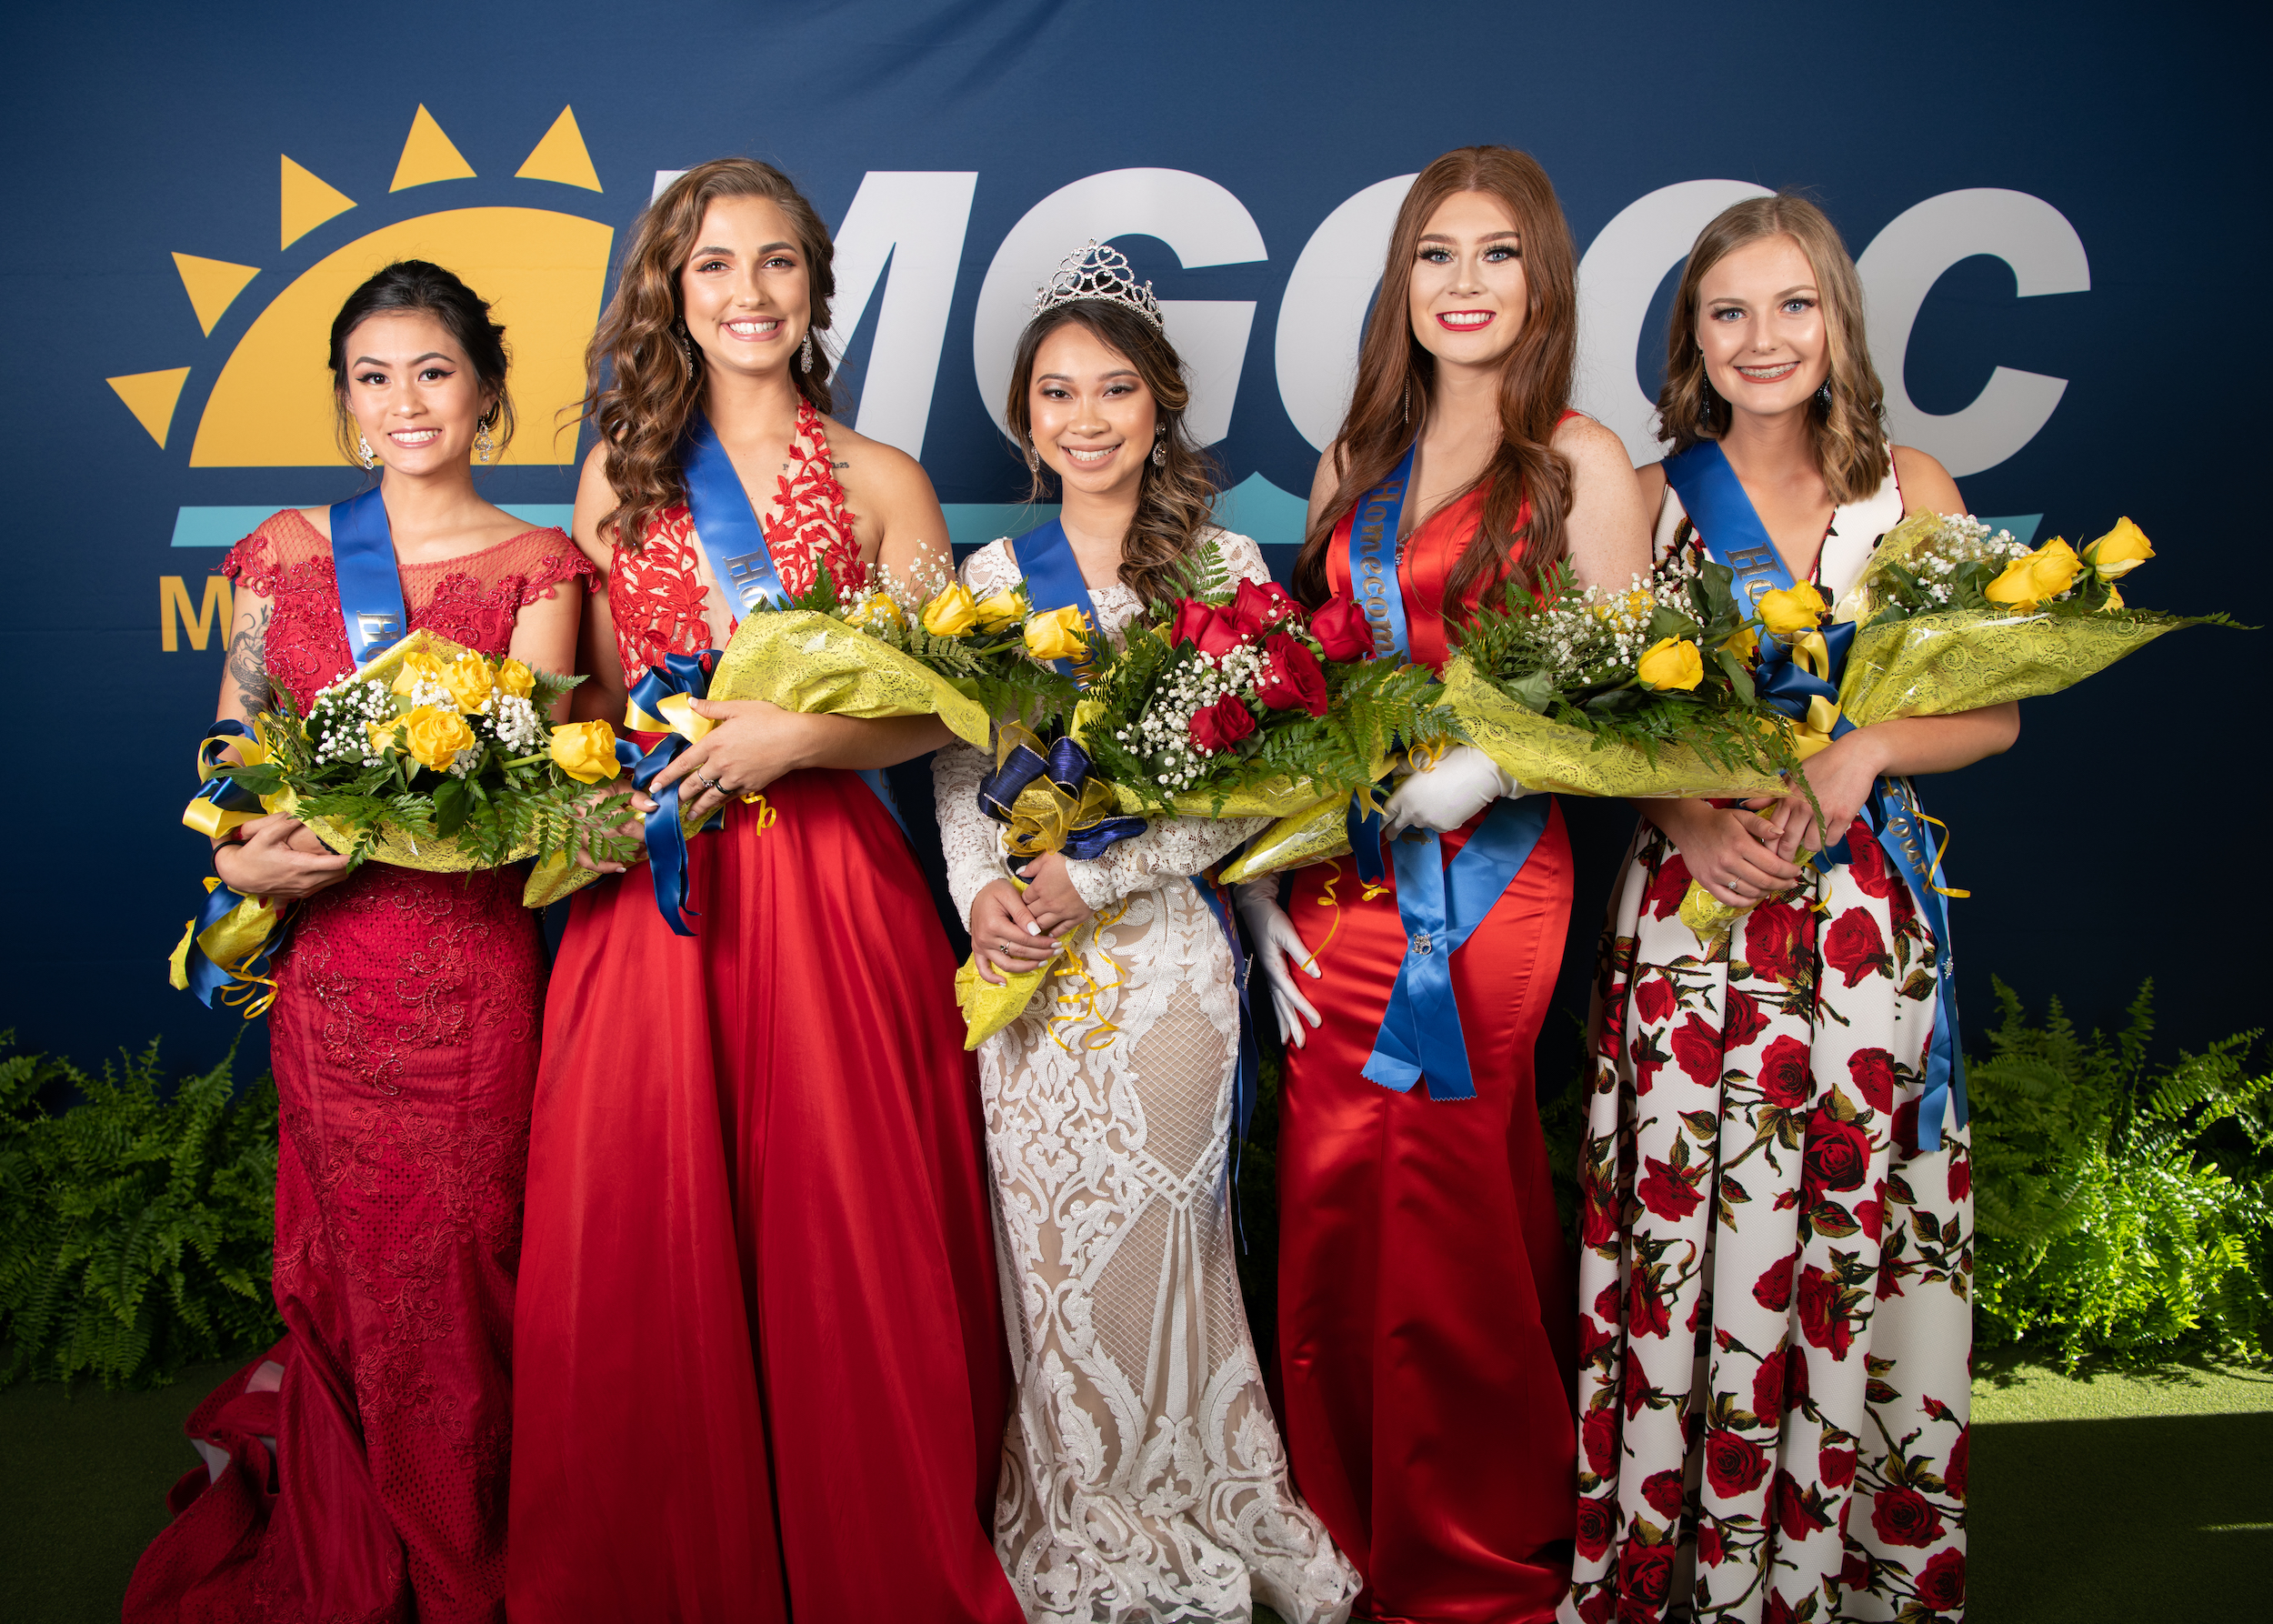 Jefferson Davis Campus Homecoming Court From left: Cindy Nguyen; Taylor Wilkerson, 2018 Jefferson Davis Campus Homecoming Queen; Cecilia Tang; Hannah Chouinard; and Hannah Kennedy. 